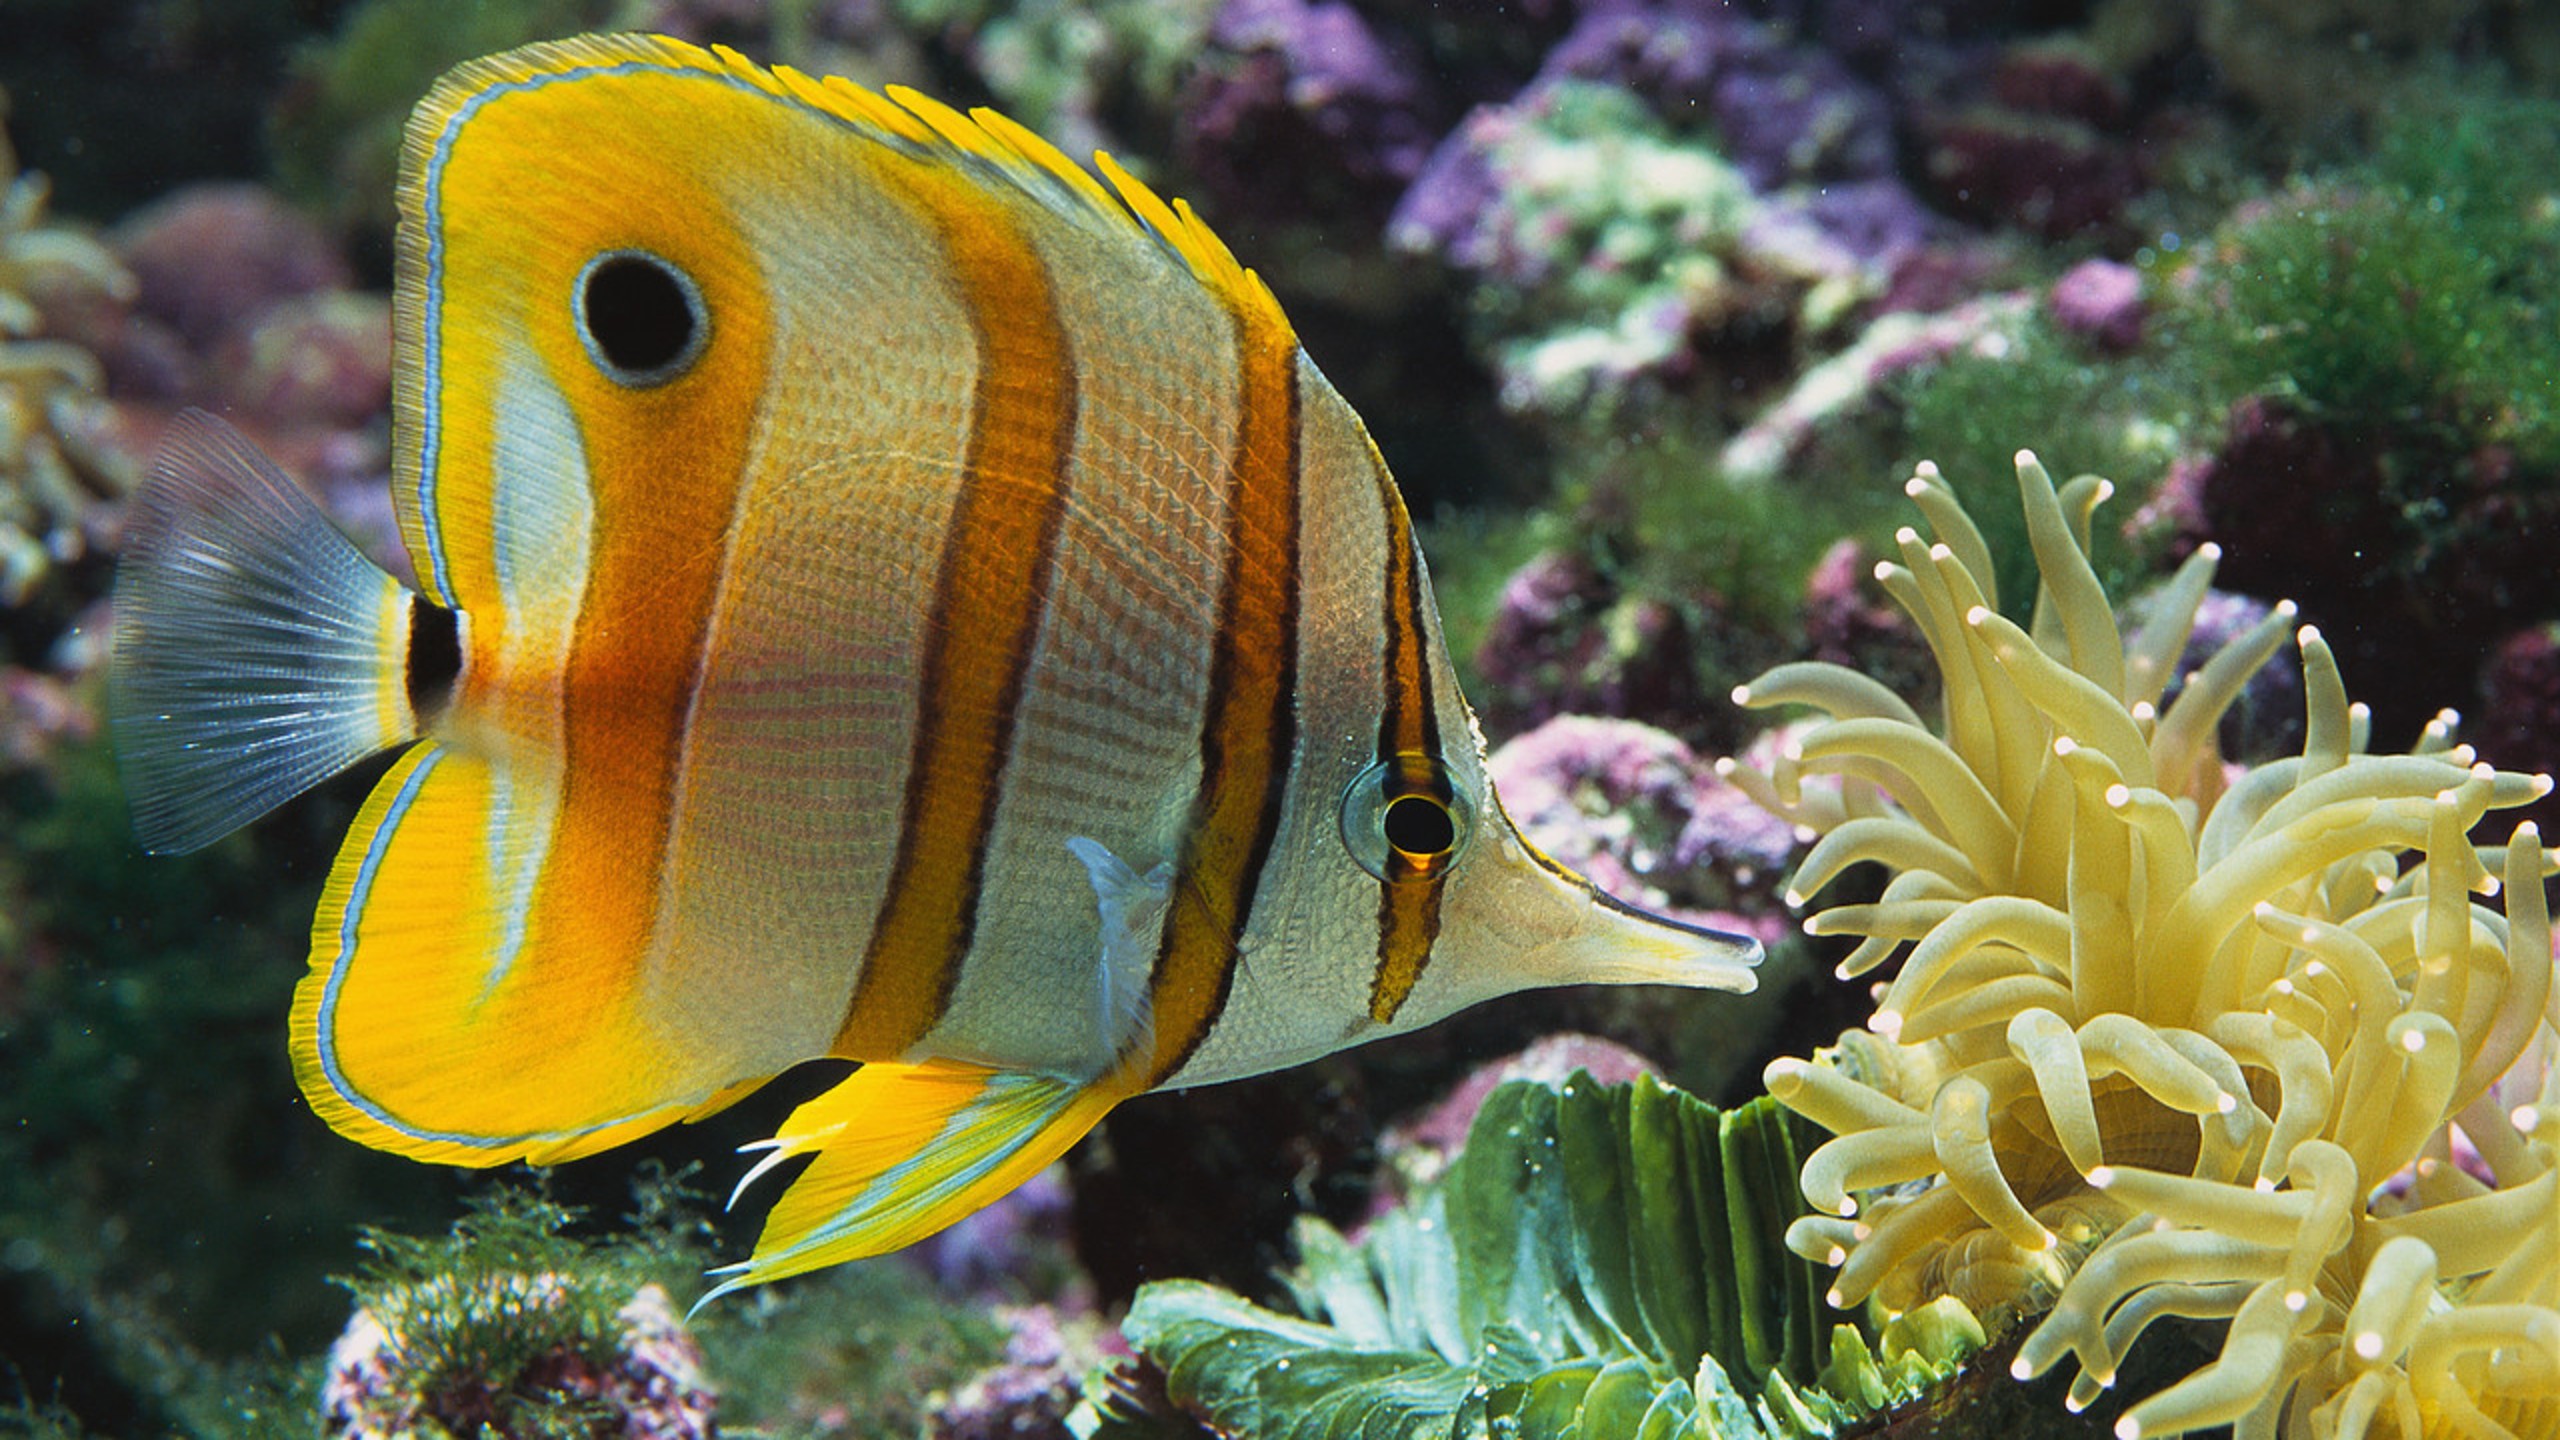 General 2560x1440 photography fish underwater sea anemones stripes Corbis coral coral reef nature Copperband butterflyfish water in water animals closeup